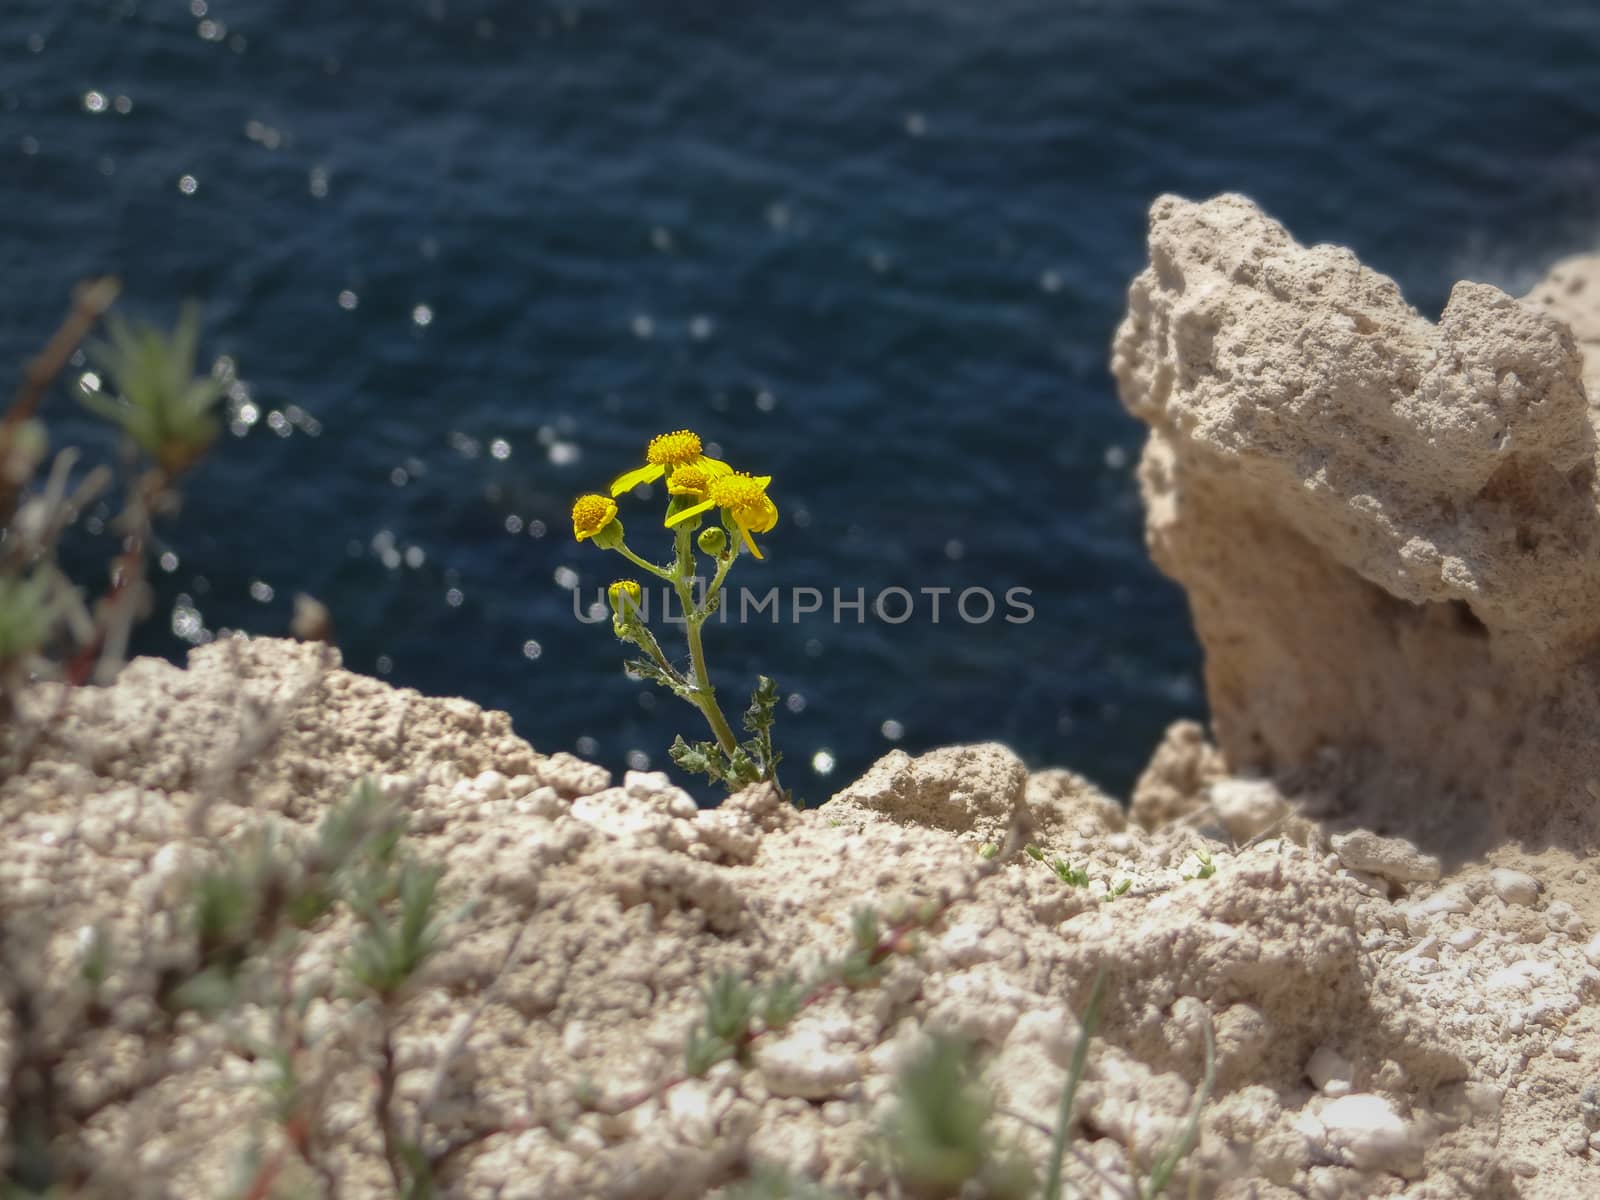 A yellow flower rising from the white rocks in front of the blue sea.